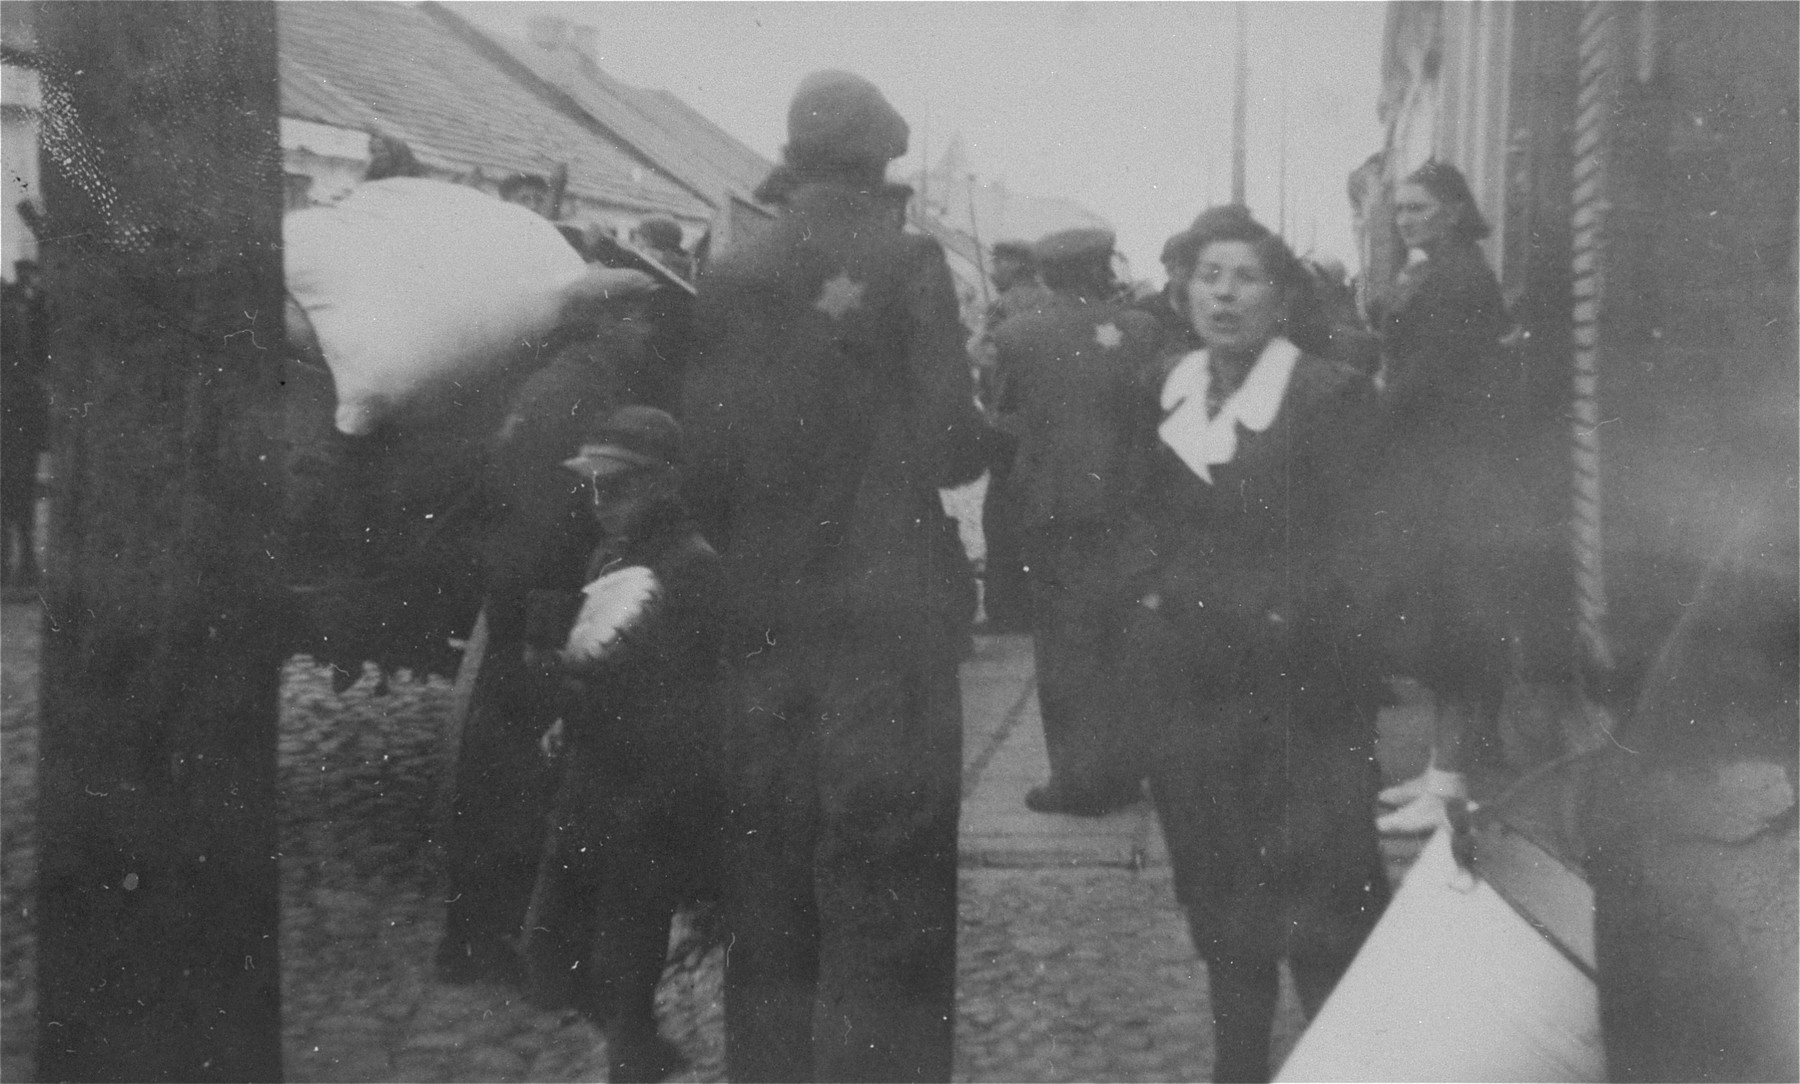 Jews stand on Pabianicka Street in Belchatow during a resettlement or deportation action.